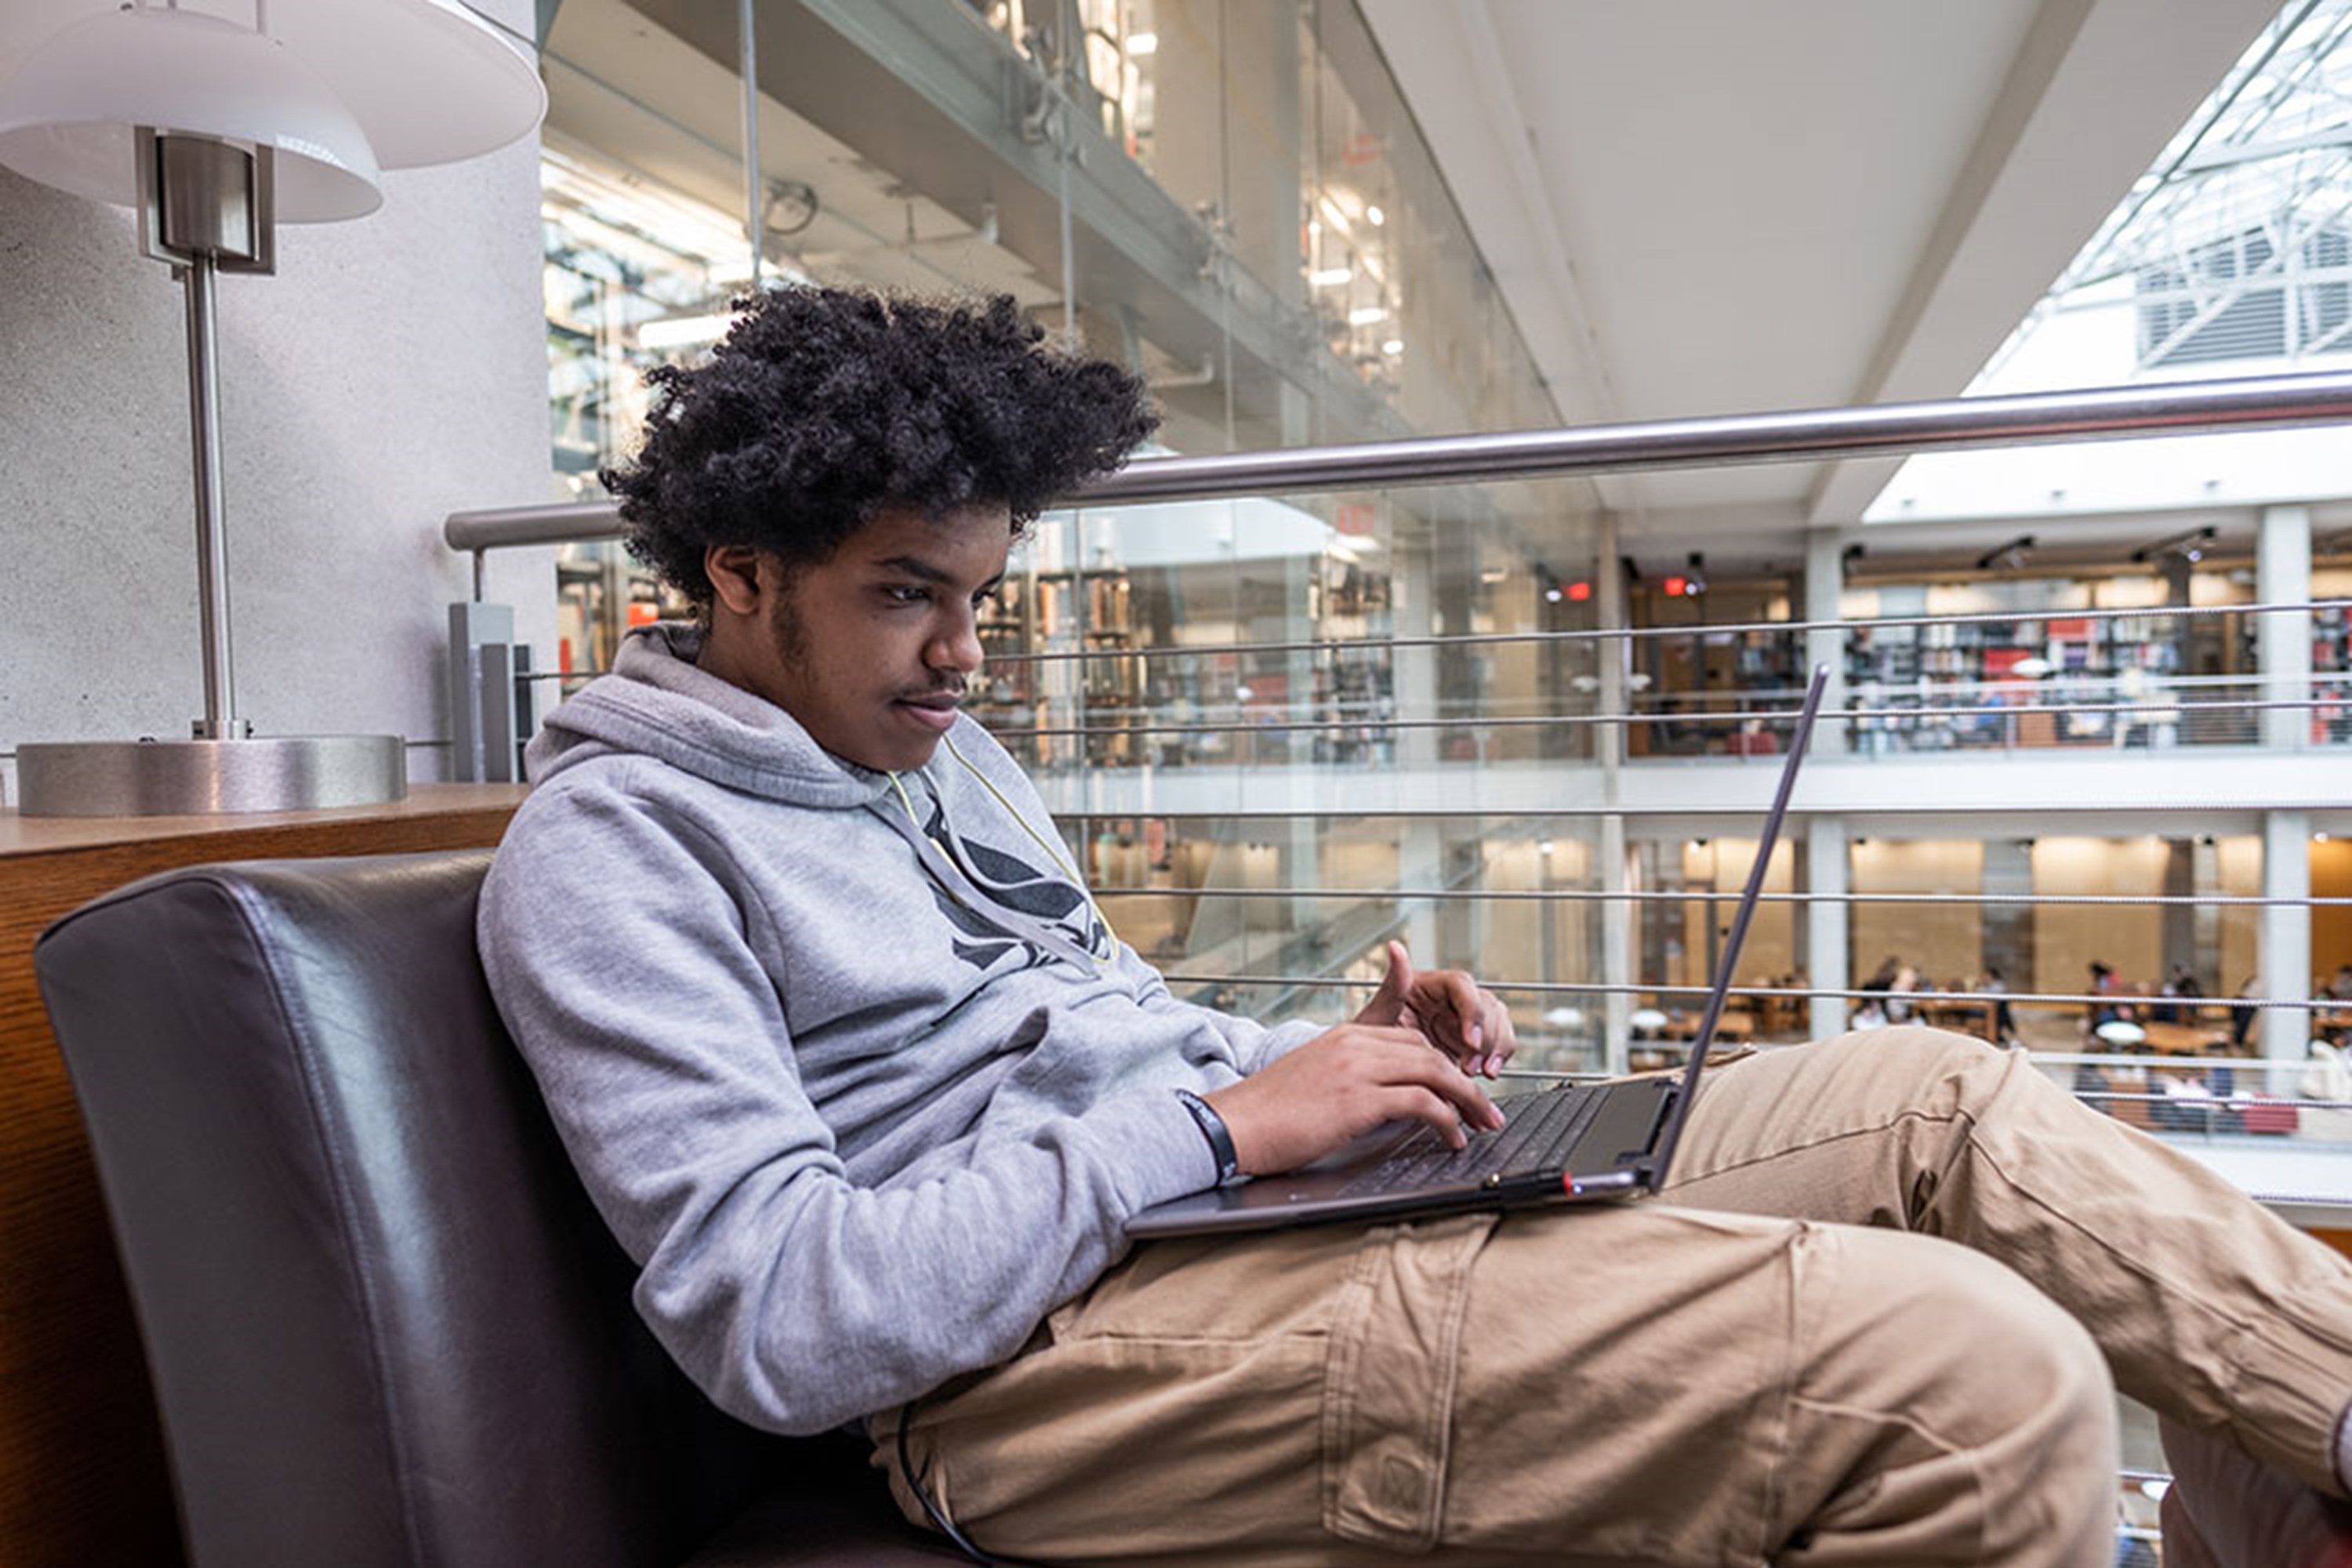 Student Studying In Library